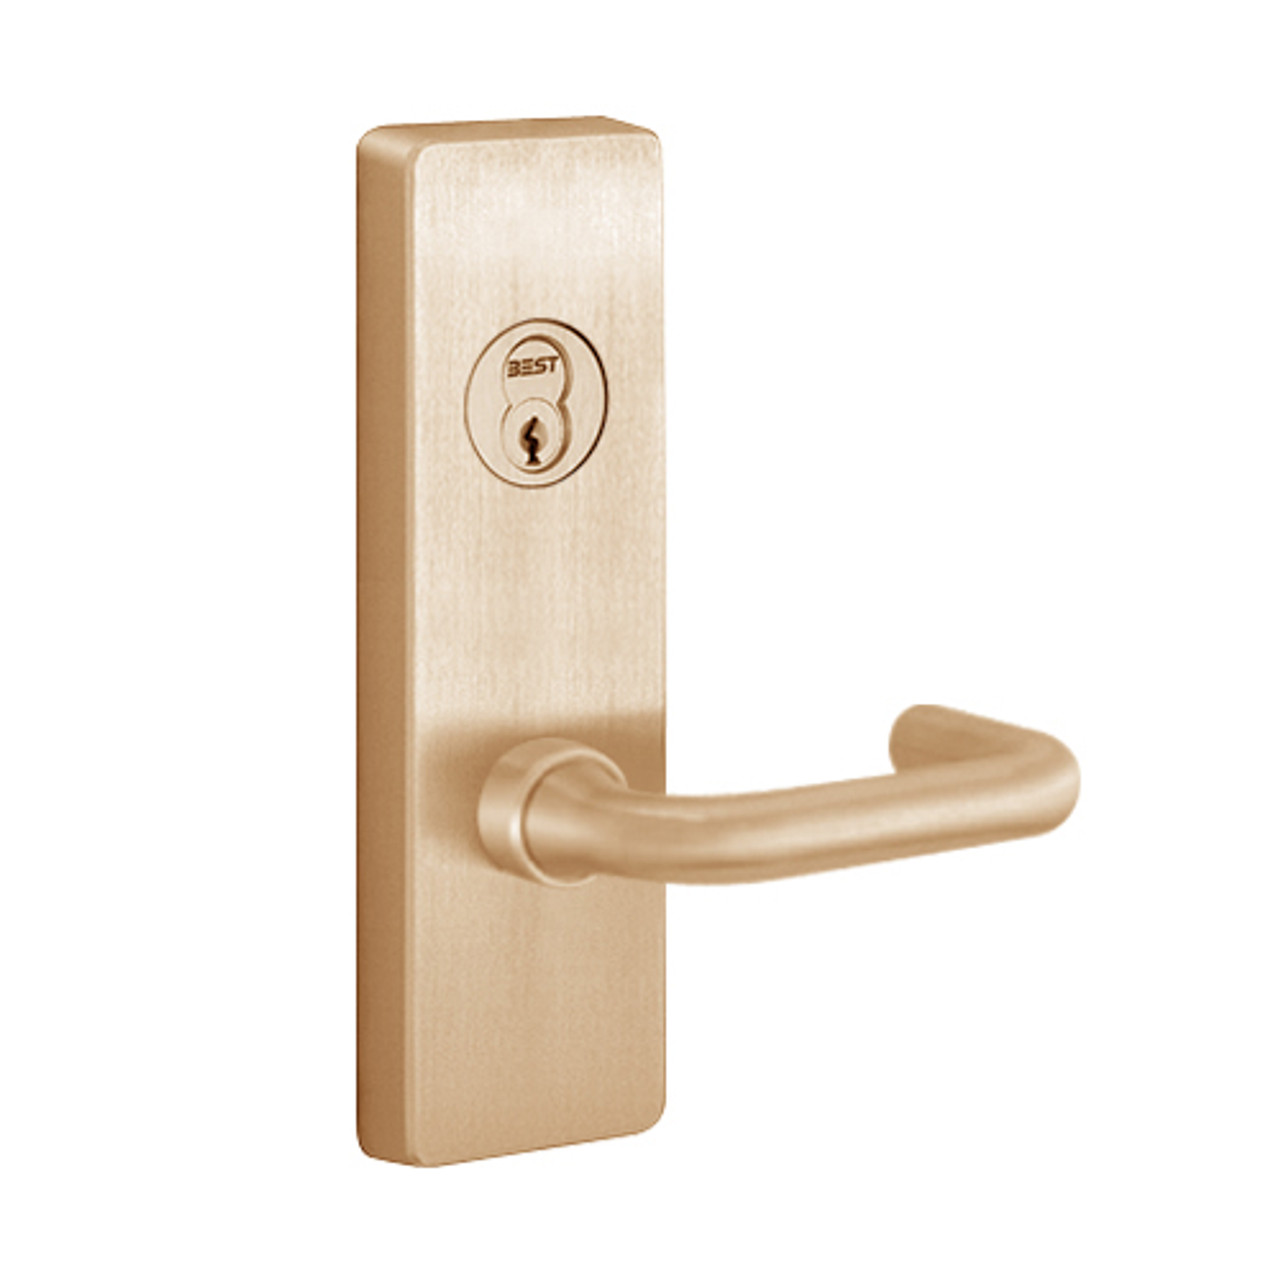 RV4908C-612-RHR PHI Key Controls Lever Vandal Resistant Retrofit Trim with C Lever Design for Apex and Olympian Series Exit Device in Satin Bronze Finish